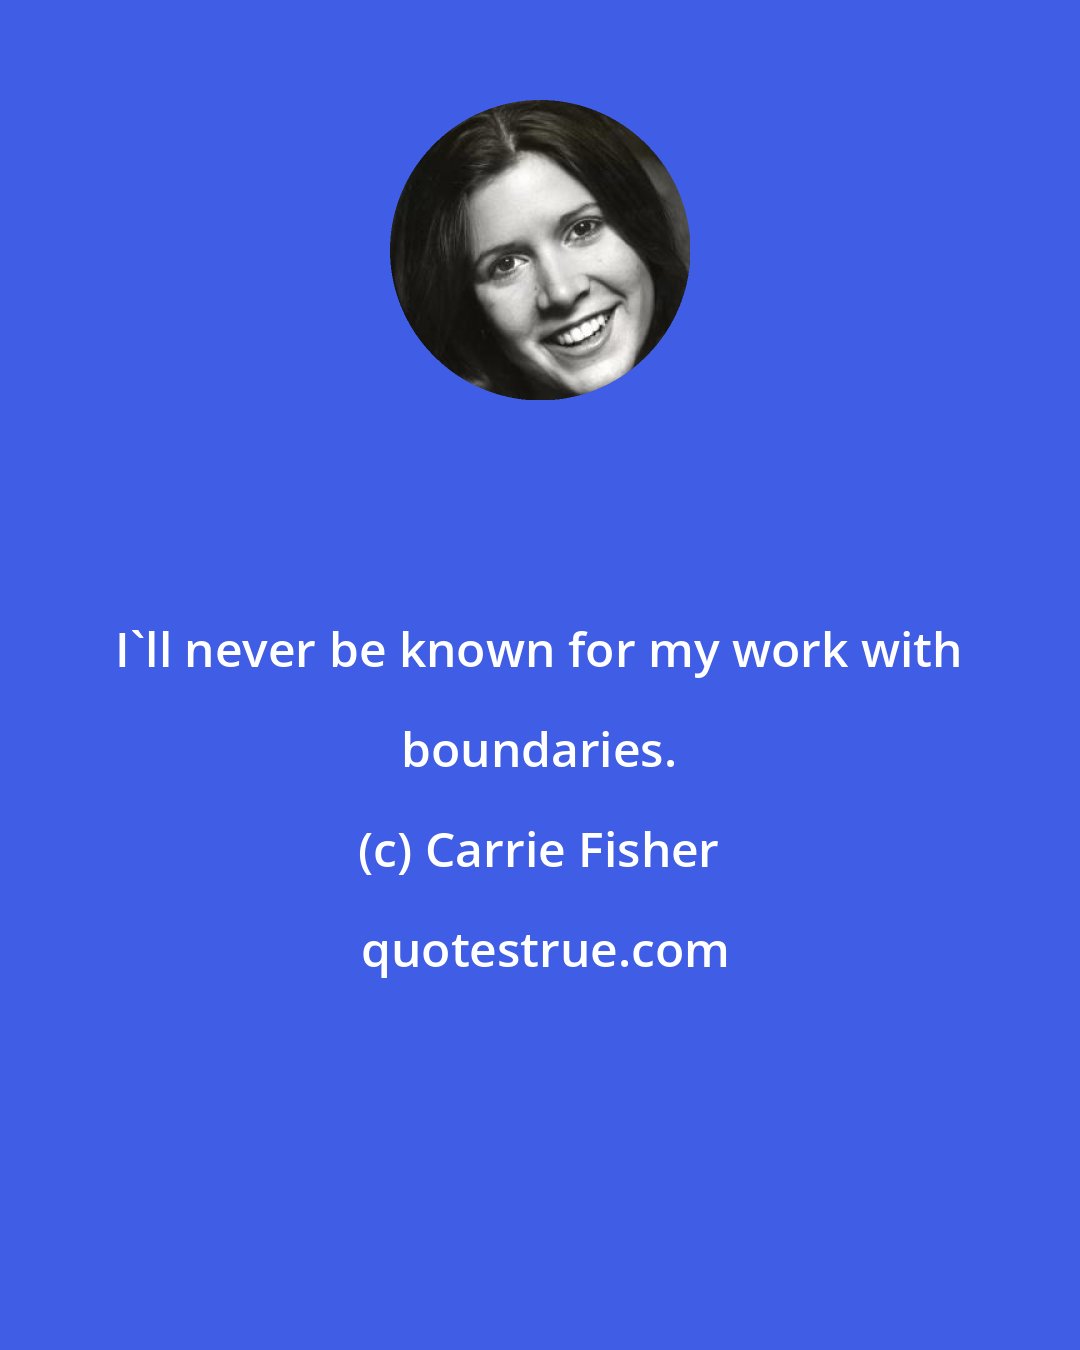 Carrie Fisher: I'll never be known for my work with boundaries.